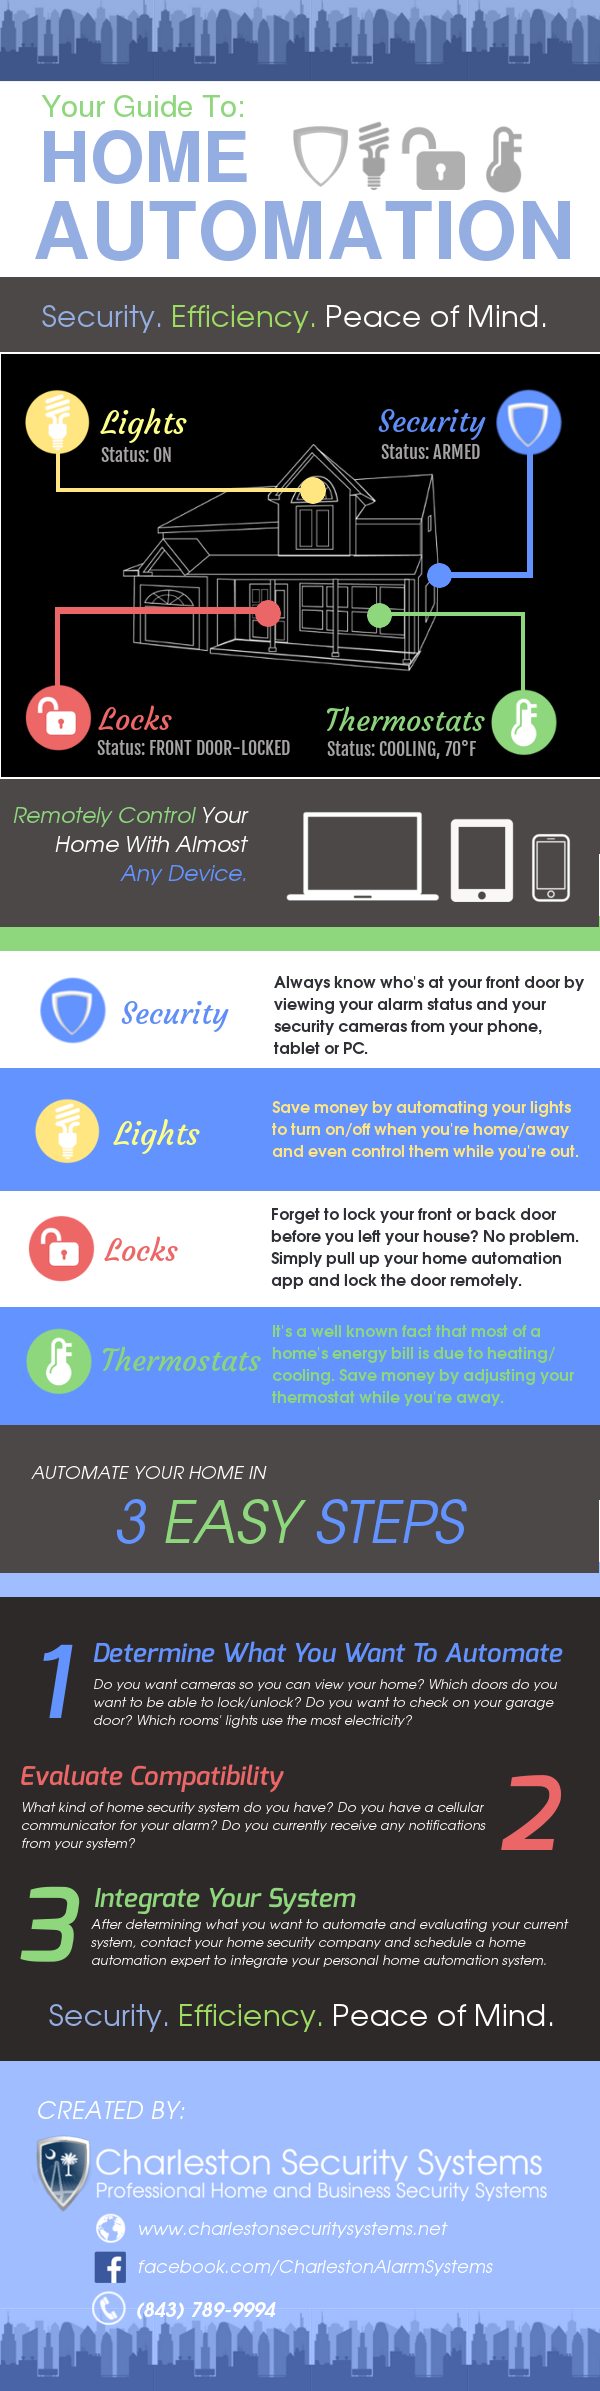 Home Automation Guide